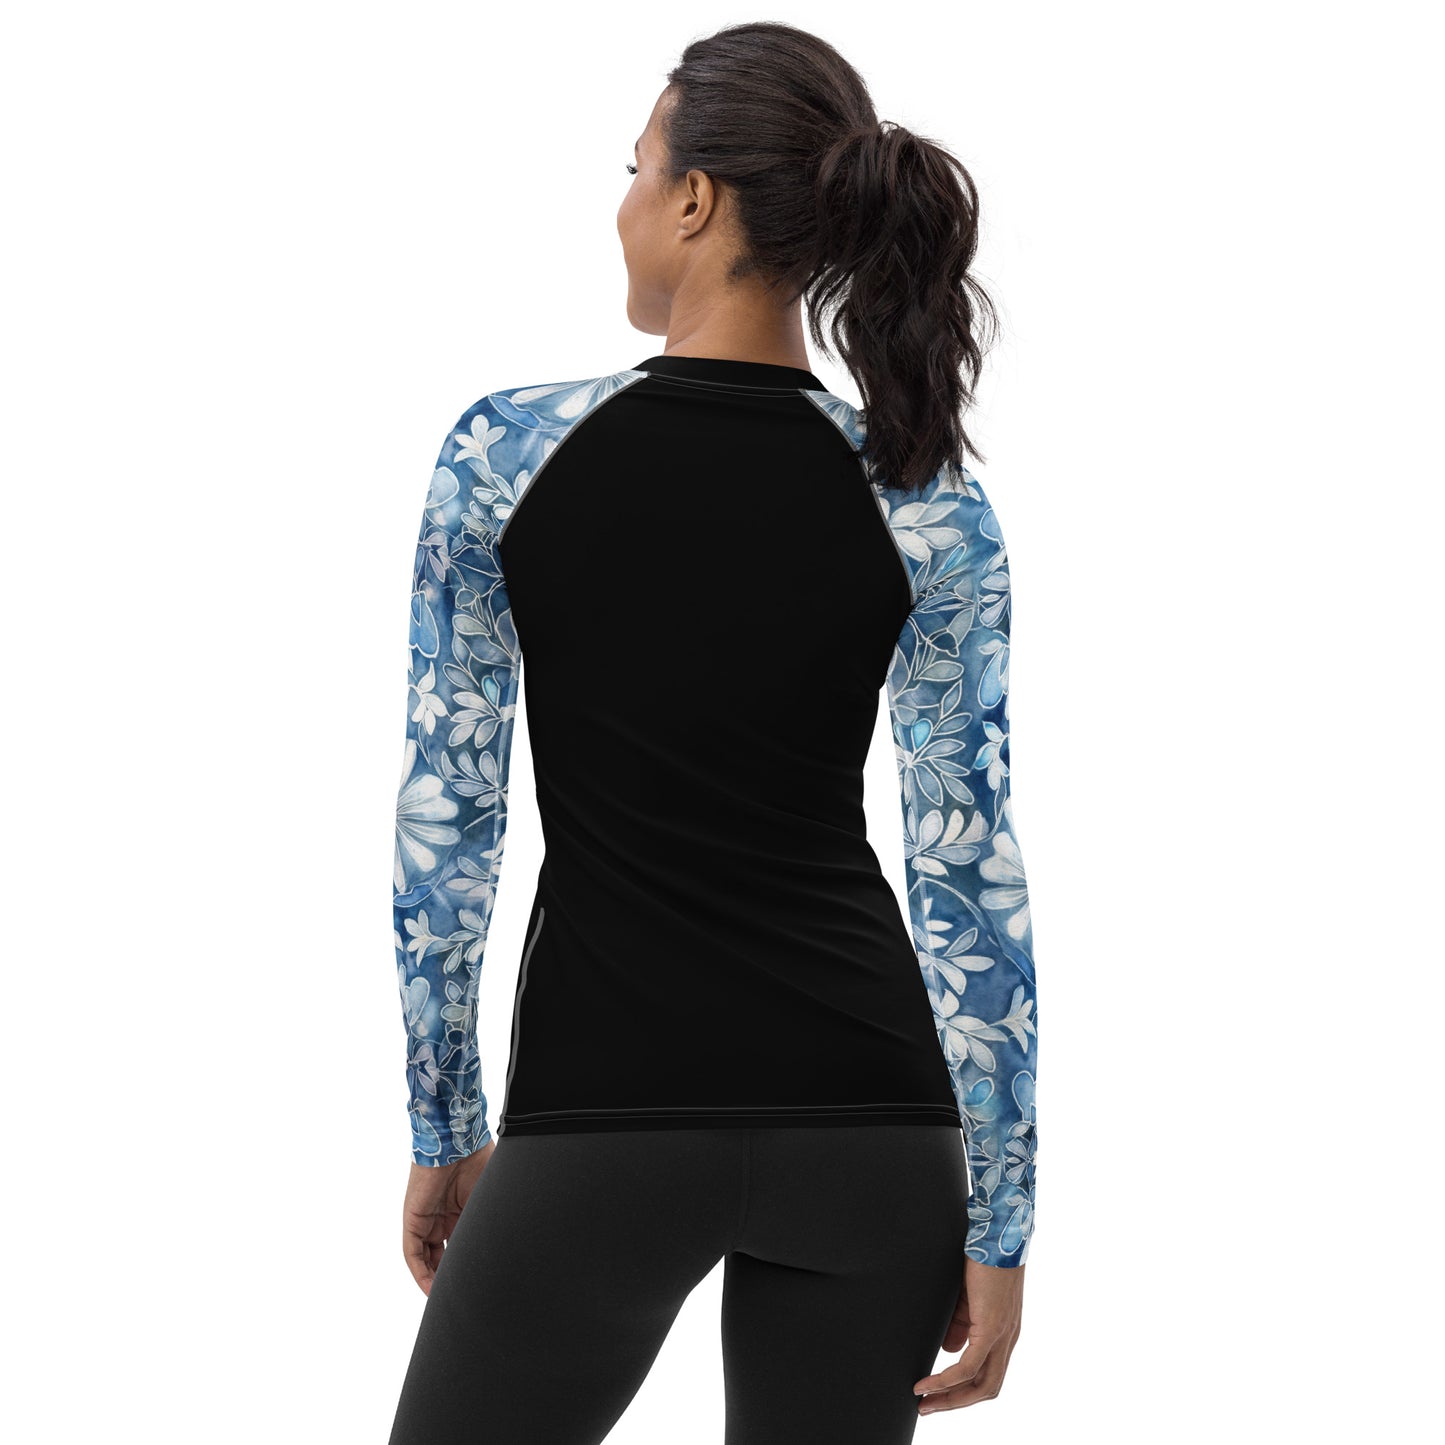 Blue with White Flowers Sleeves and Black Body - Women's Rash Guard